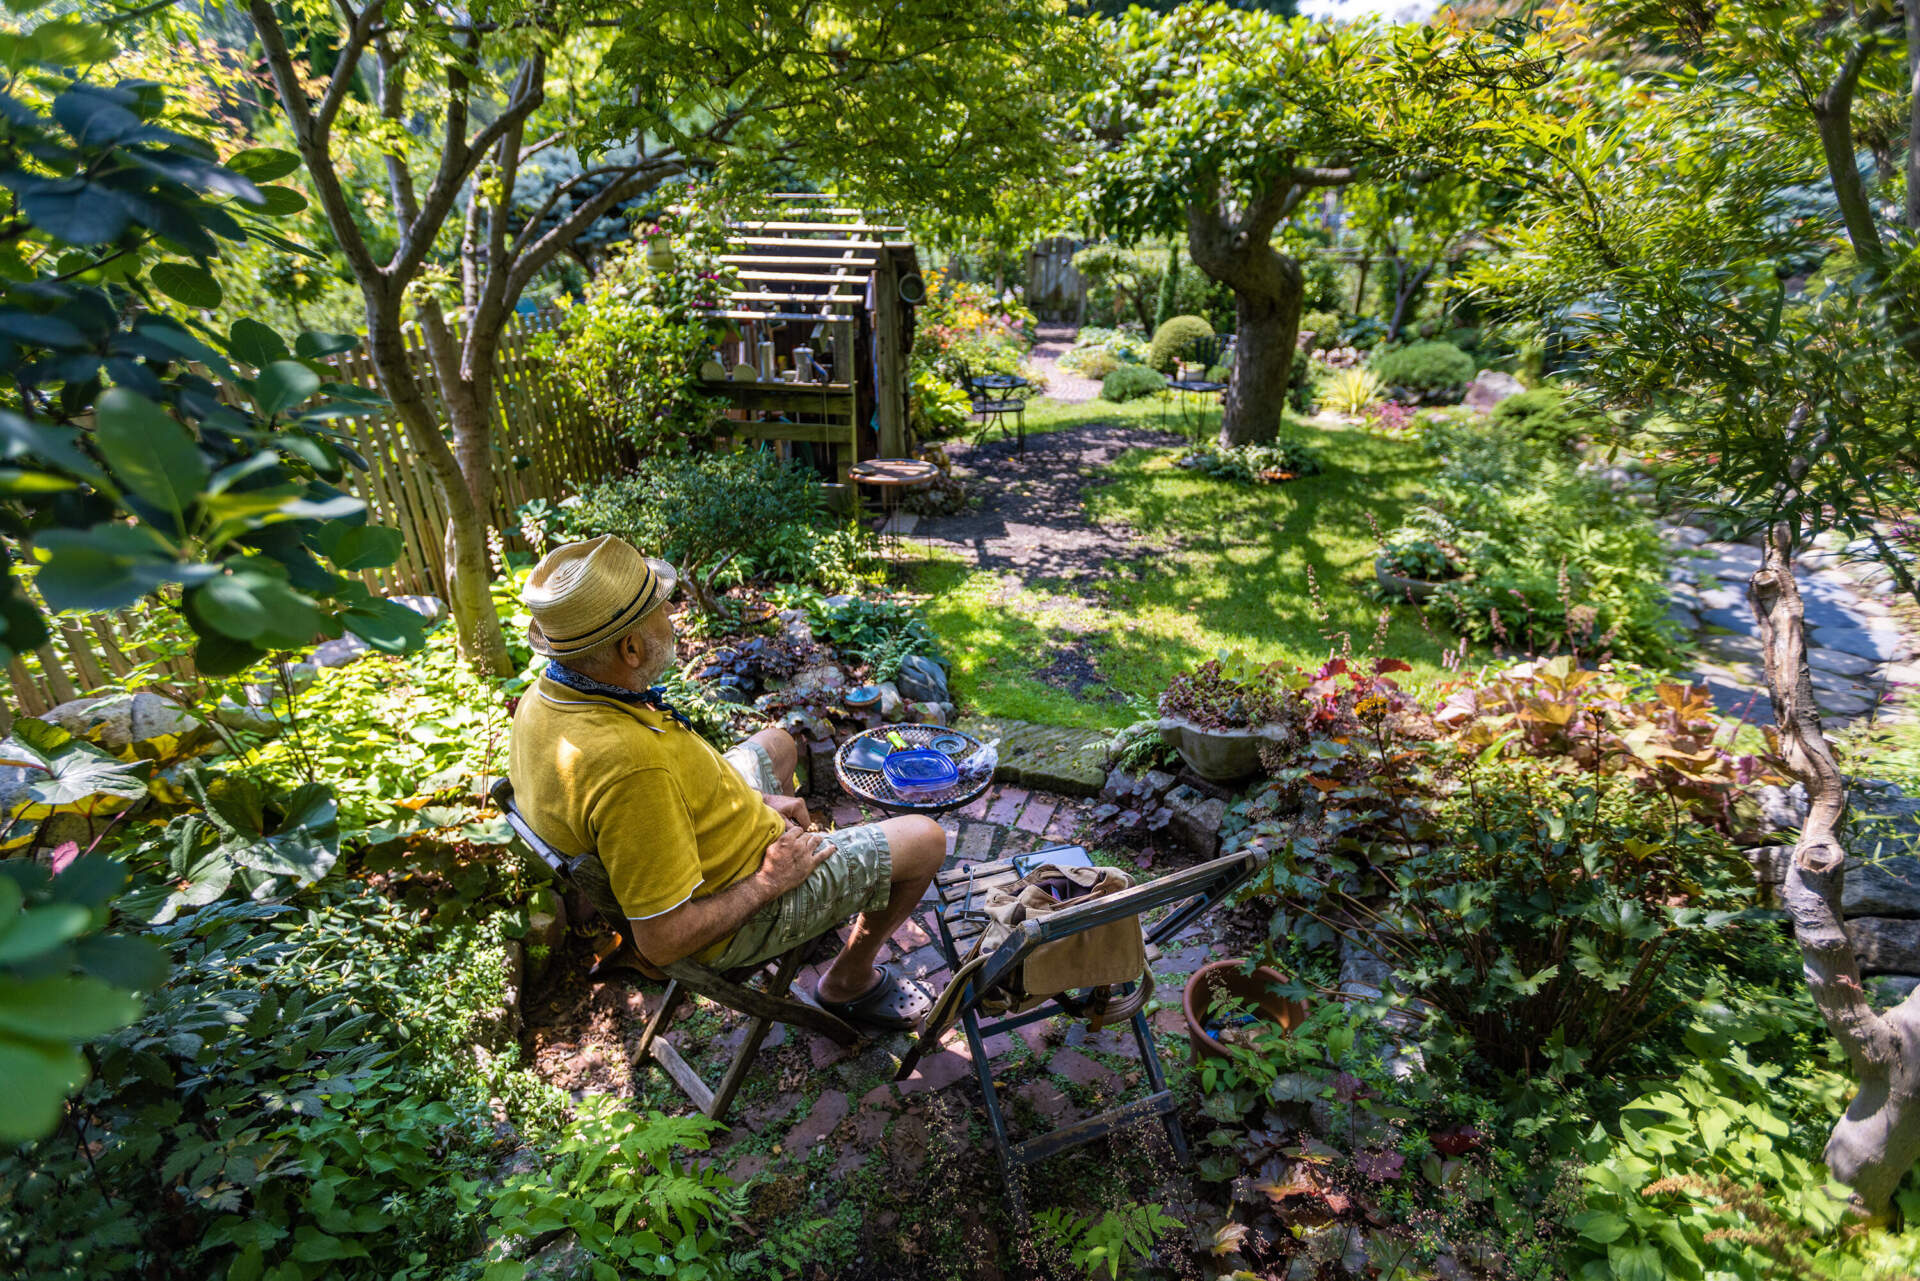 Richard Malkasian sits and relaxes in his garden, 36 years in the making, at the Fenway Garden. (Jesse Costa/WBUR)